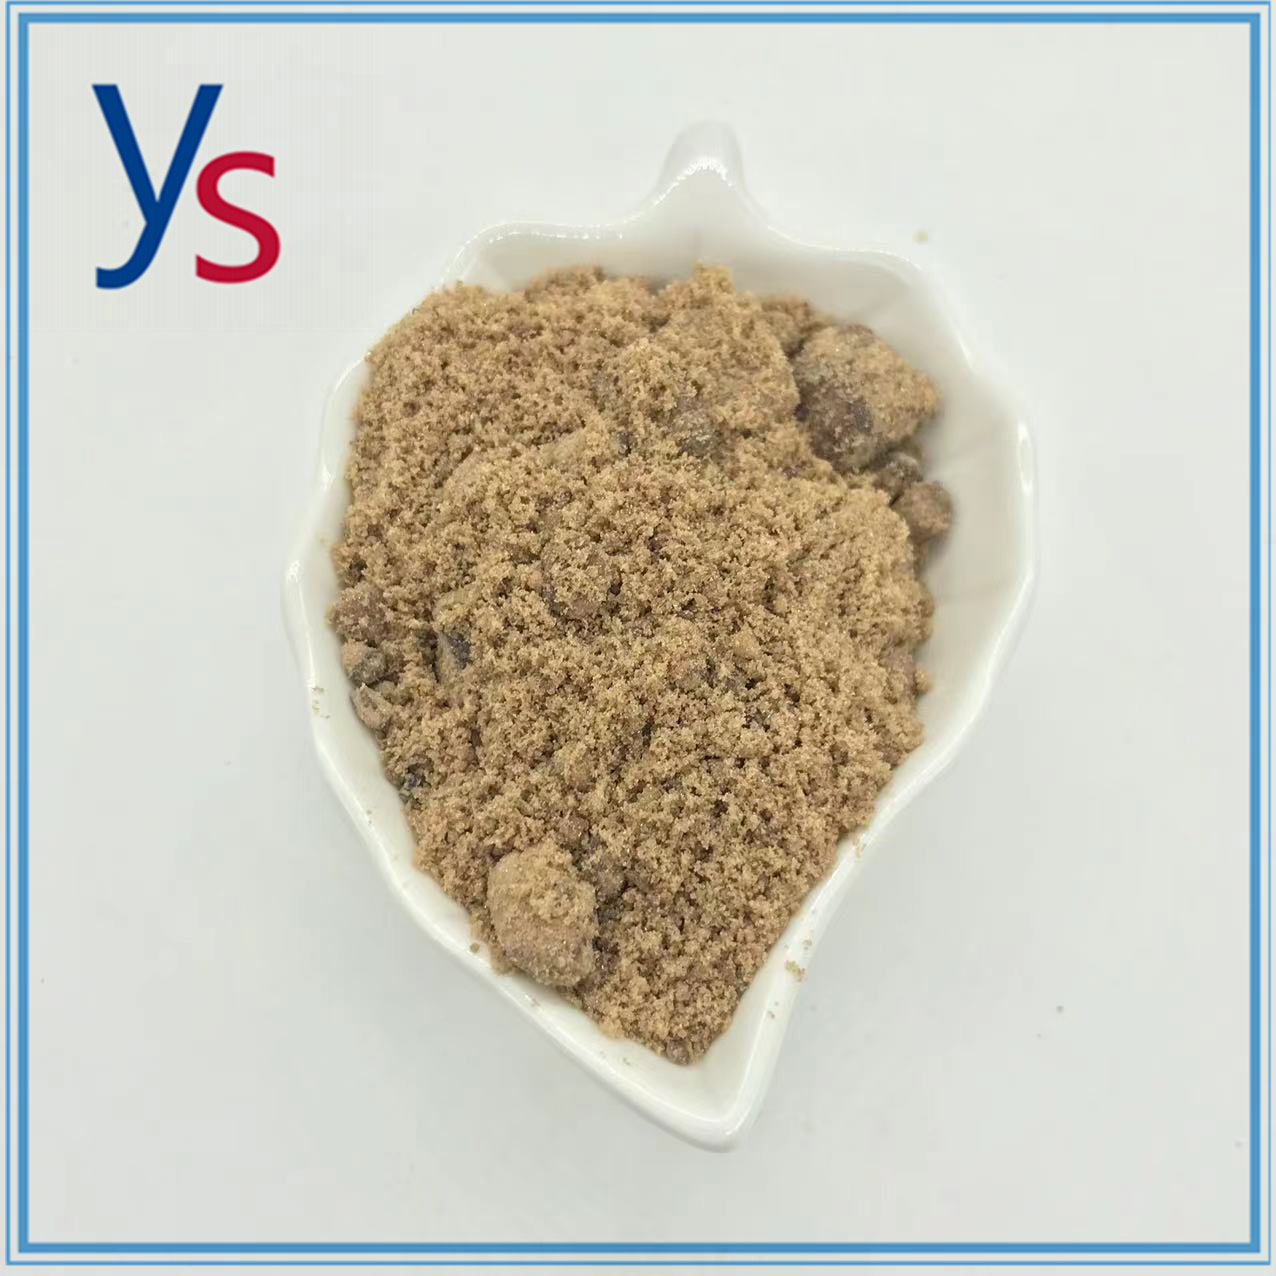 Cas 52190-28-0 High Purity High Quality Hot Sell 